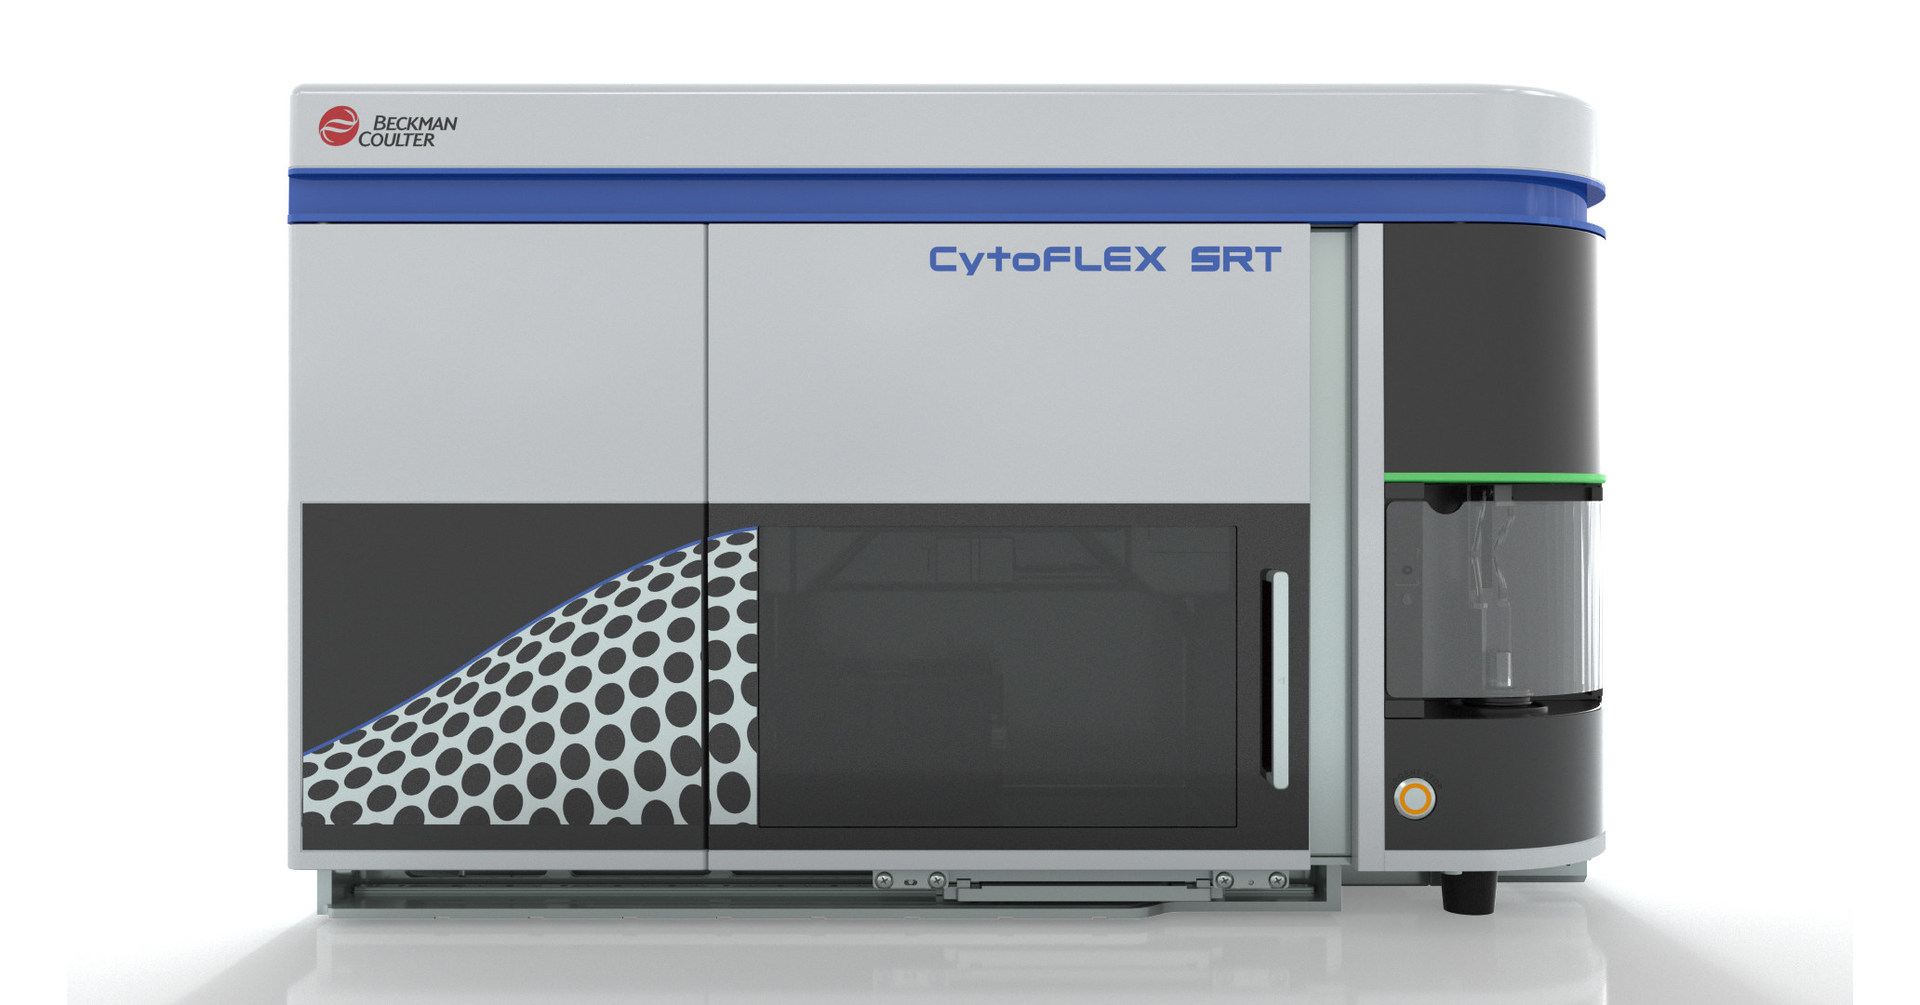 Beckman Coulter Life Sciences Launches Next Generation Cytoflex Srt Benchtop Cell Sorter